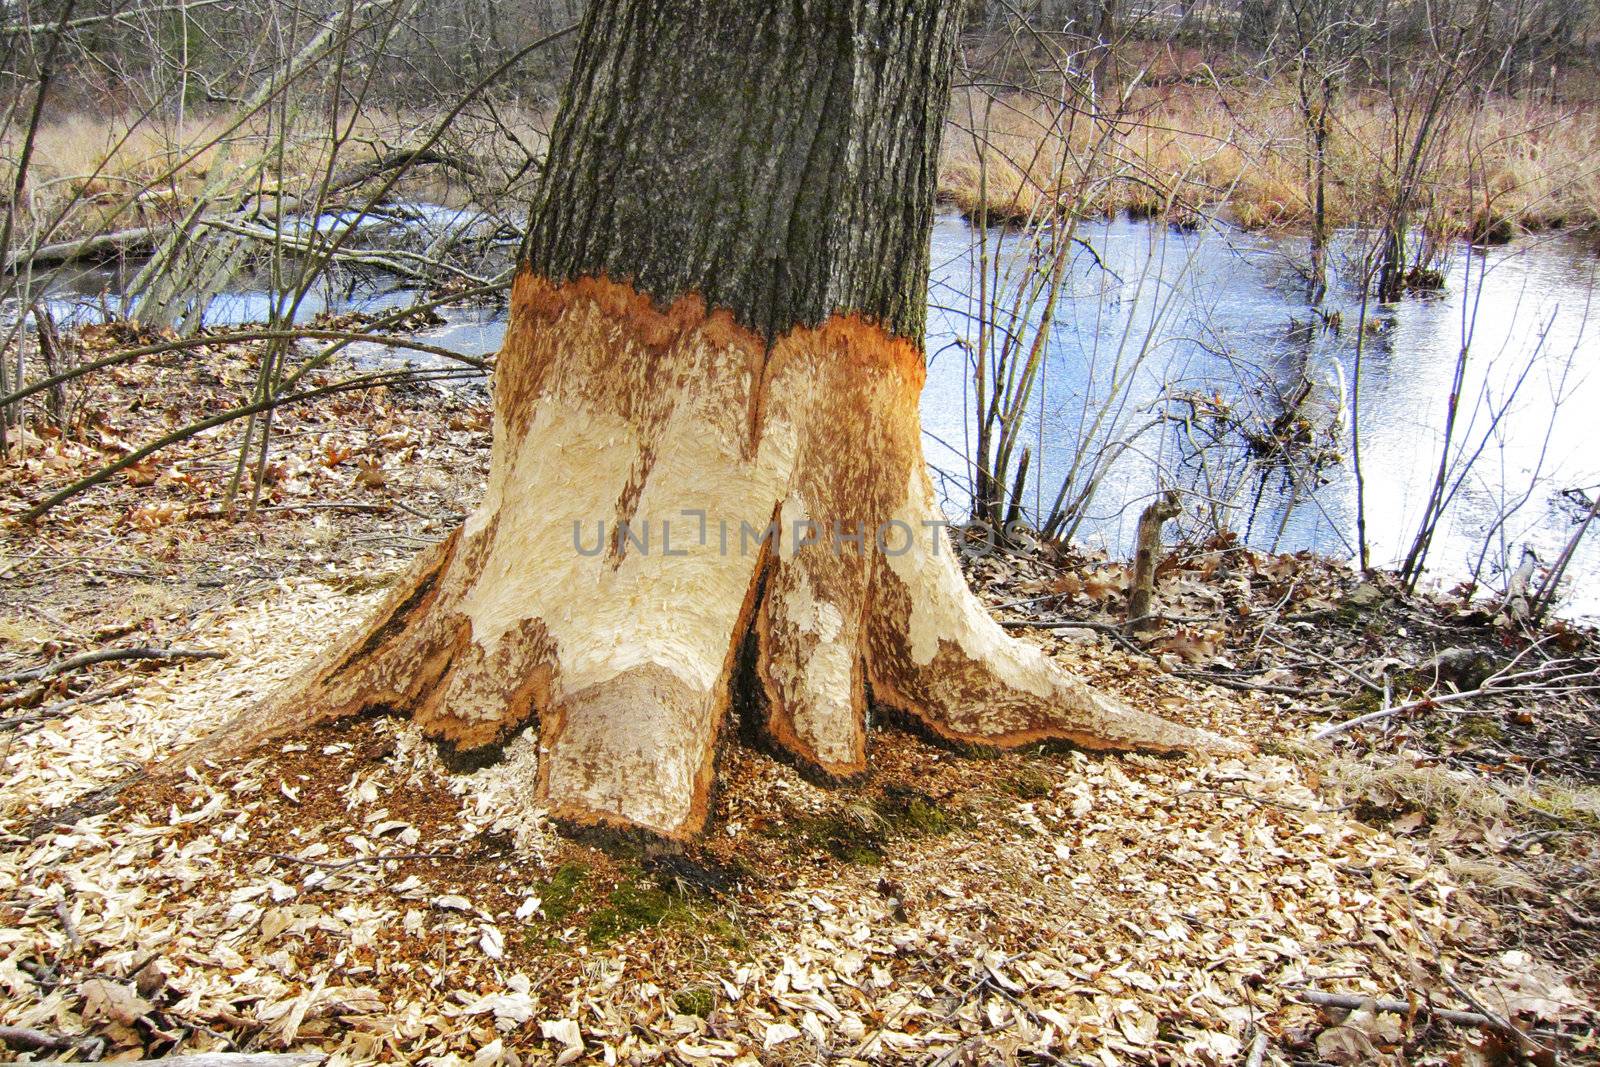 Beaver tree gnawing damage in forest